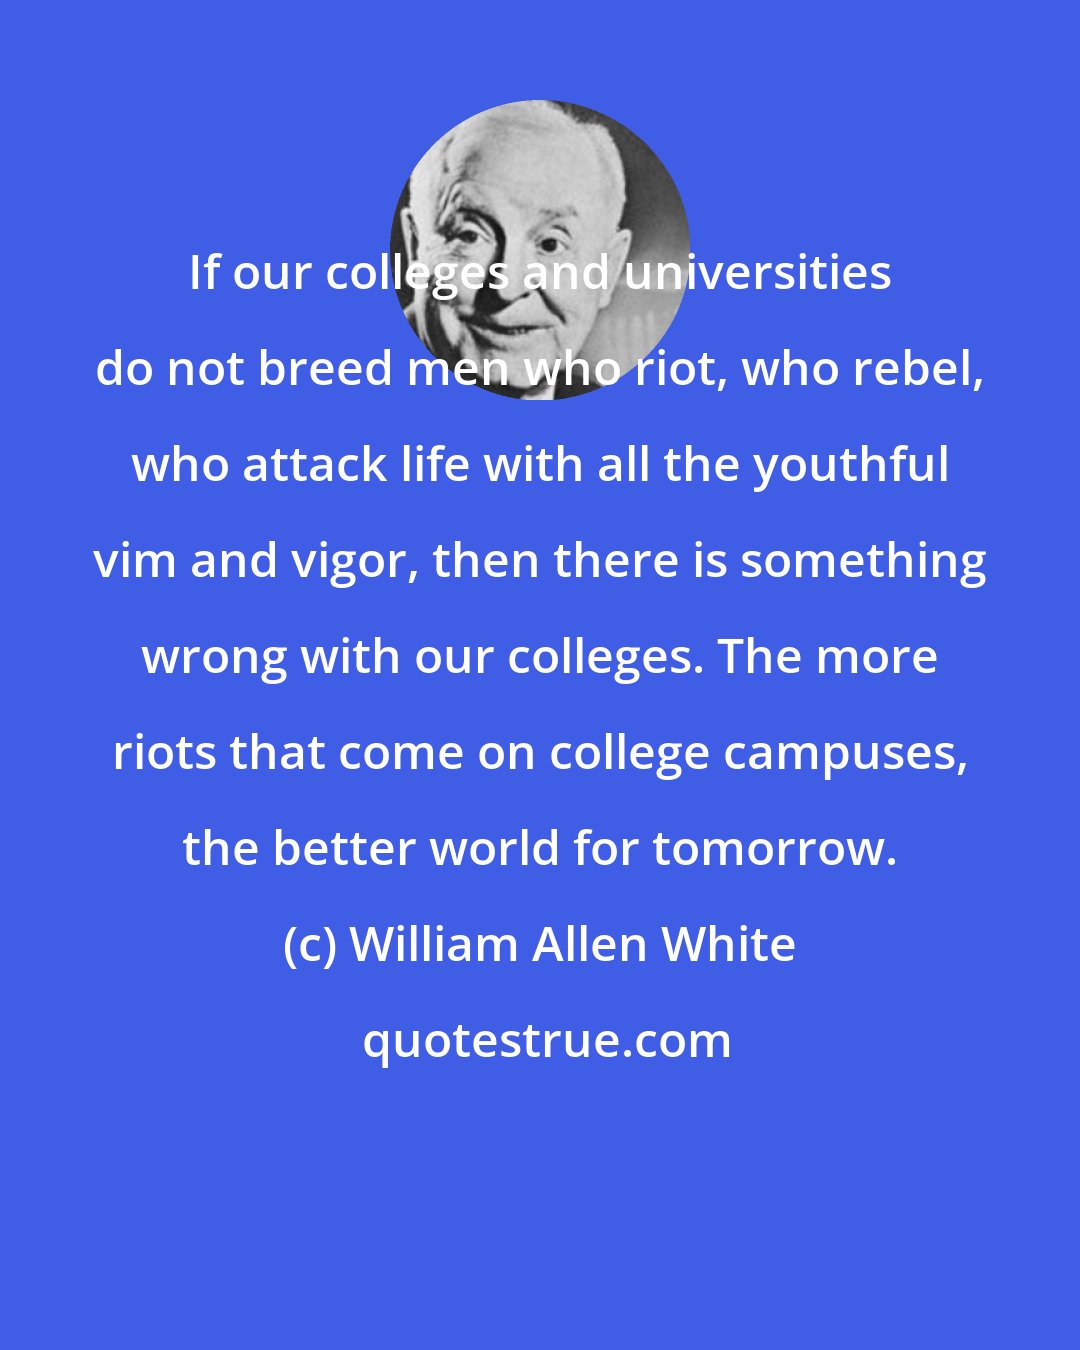 William Allen White: If our colleges and universities do not breed men who riot, who rebel, who attack life with all the youthful vim and vigor, then there is something wrong with our colleges. The more riots that come on college campuses, the better world for tomorrow.